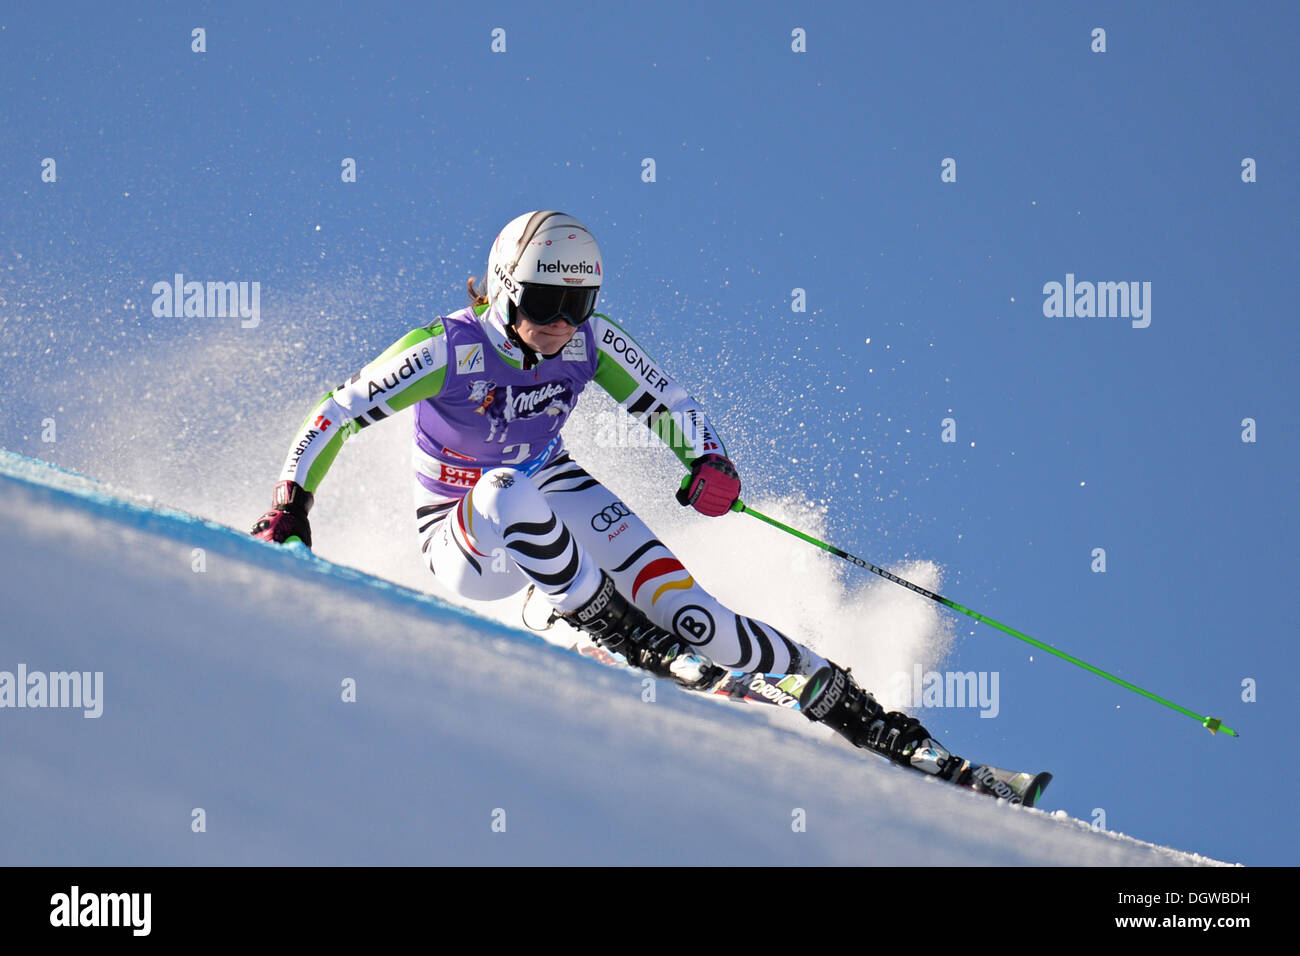 SOELDEN AUSTRIA - OCTOBER 26: Viktoria Rebensburg from Germany races down the course during the Audi FIS Alpine World Cup Women's Giant Slalom on 26 October, 2013 in Soelden Austria, Credit:  European Sports Photographic Agency/Alamy Live News Stock Photo